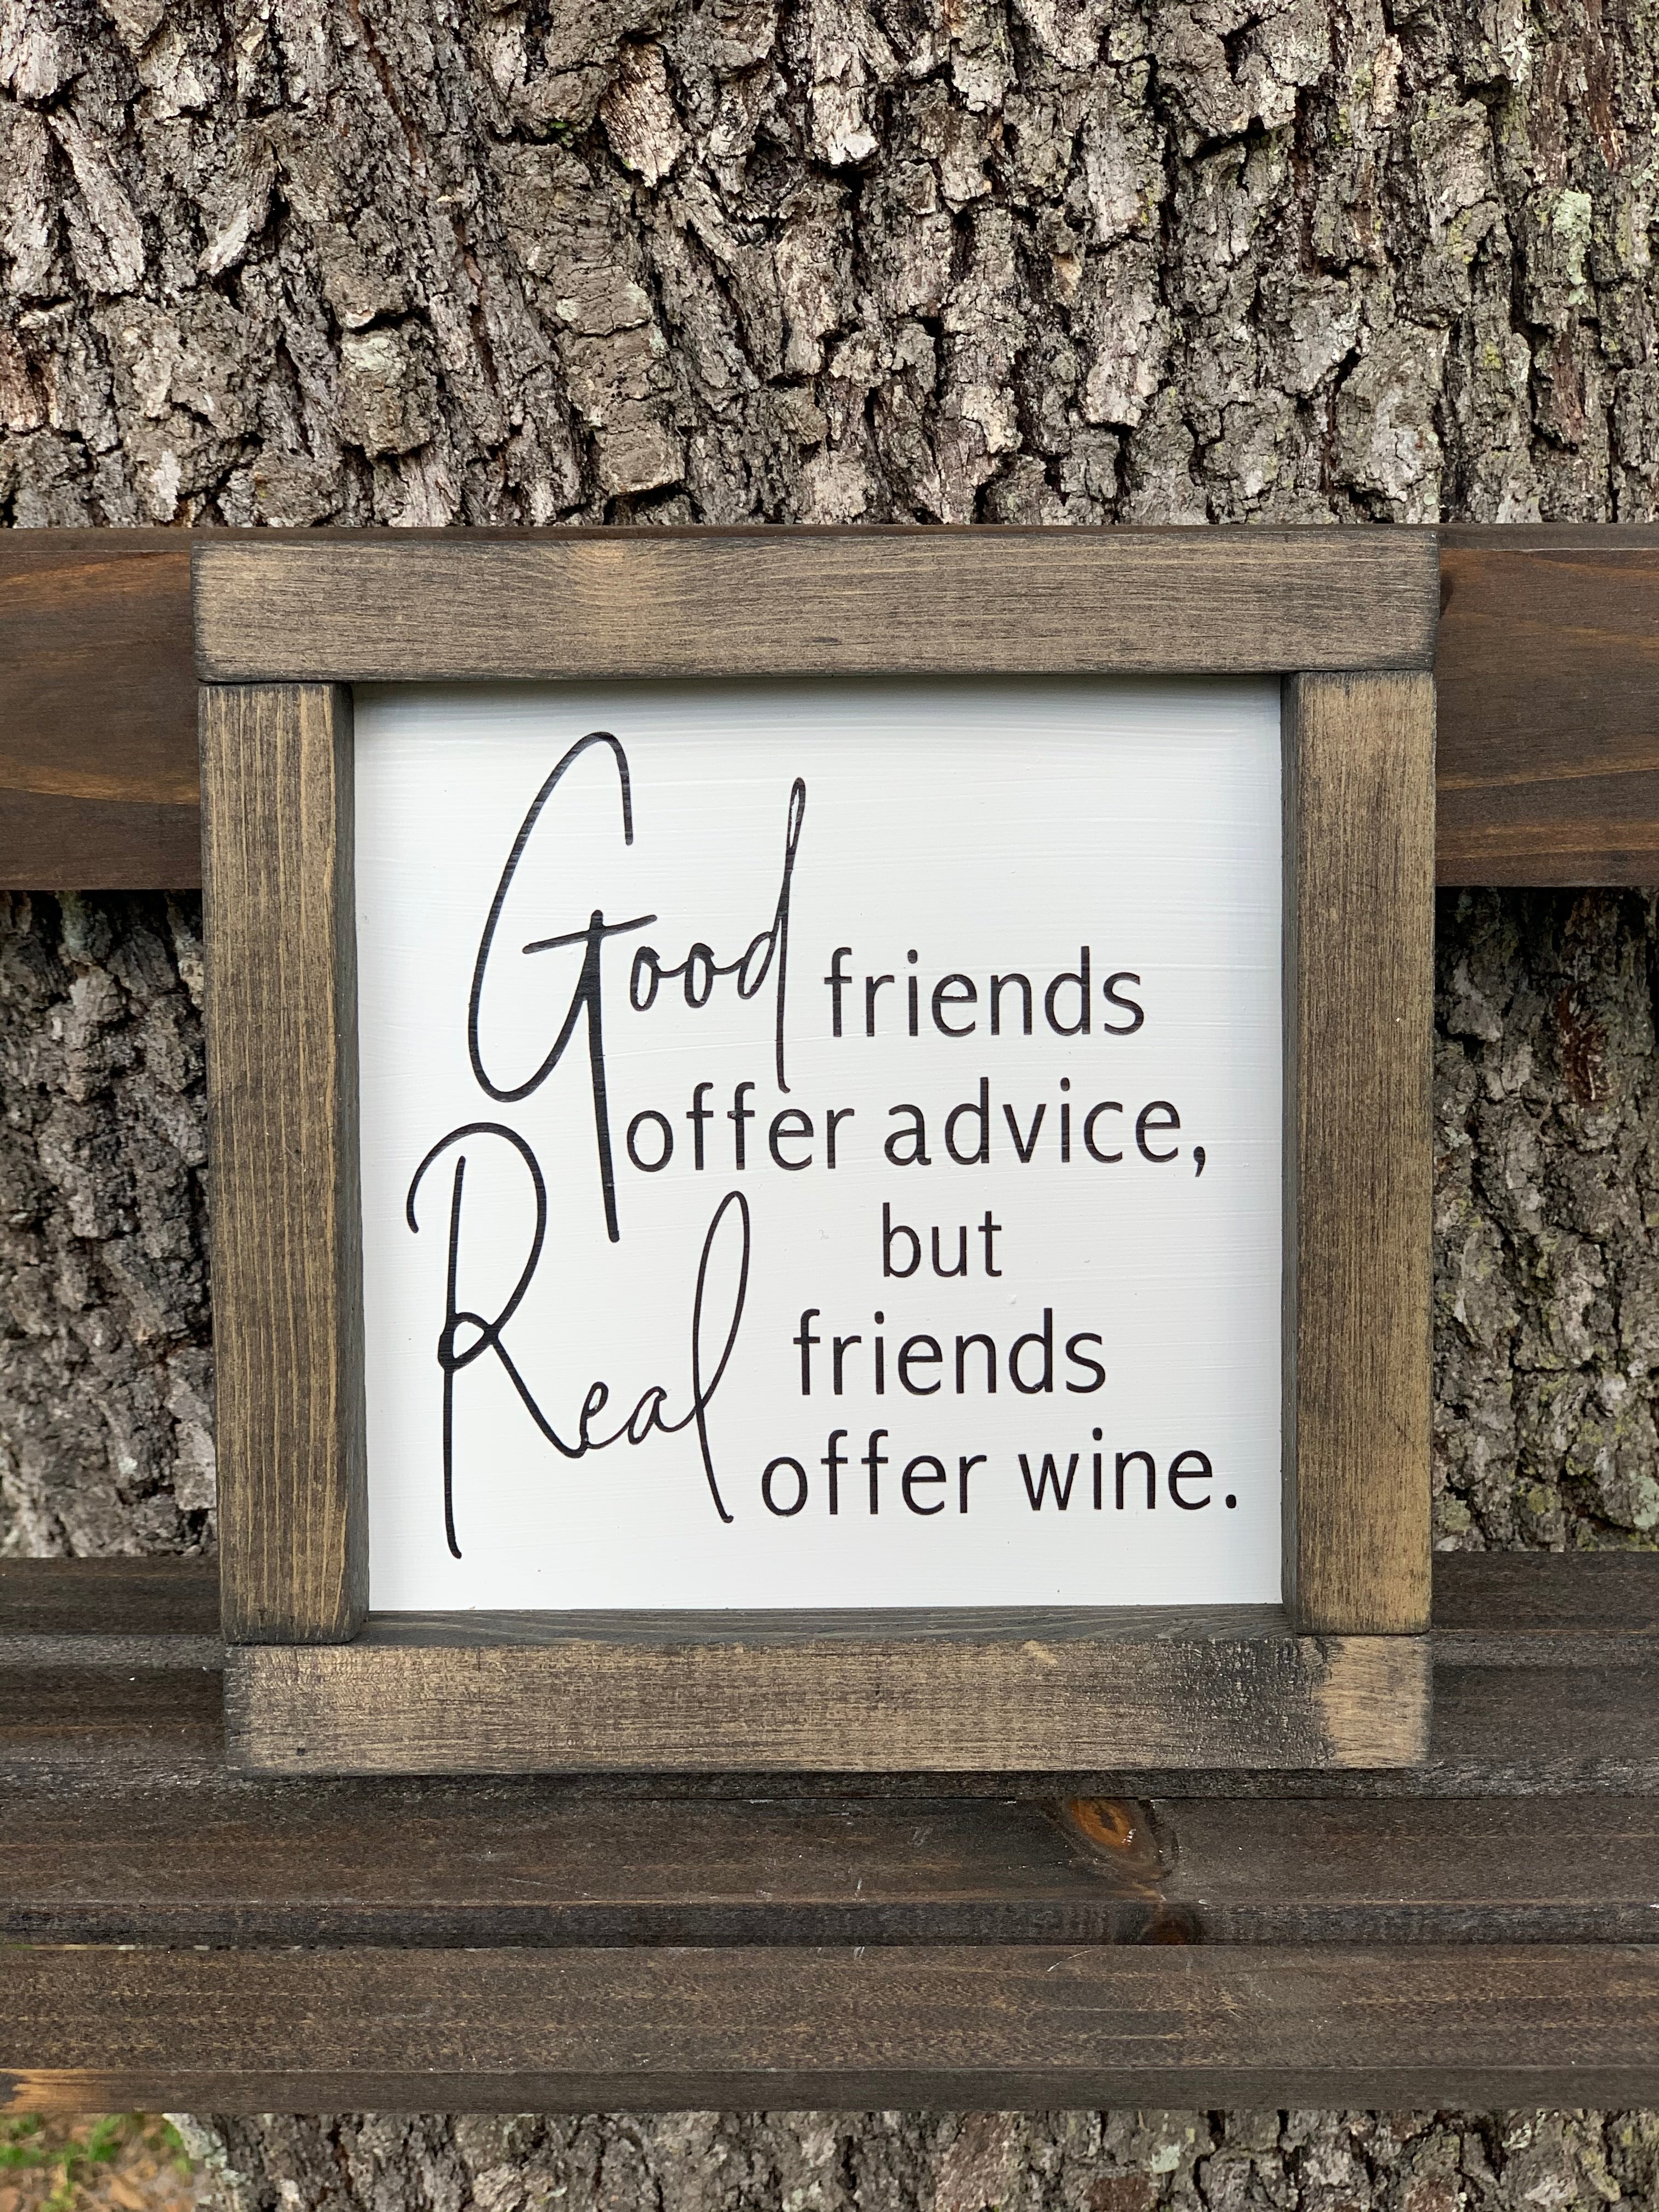 Good Friends Offer Advice, But Real Friends Offer Wine (Script Version) shows the sign sitting outside on a ladder.